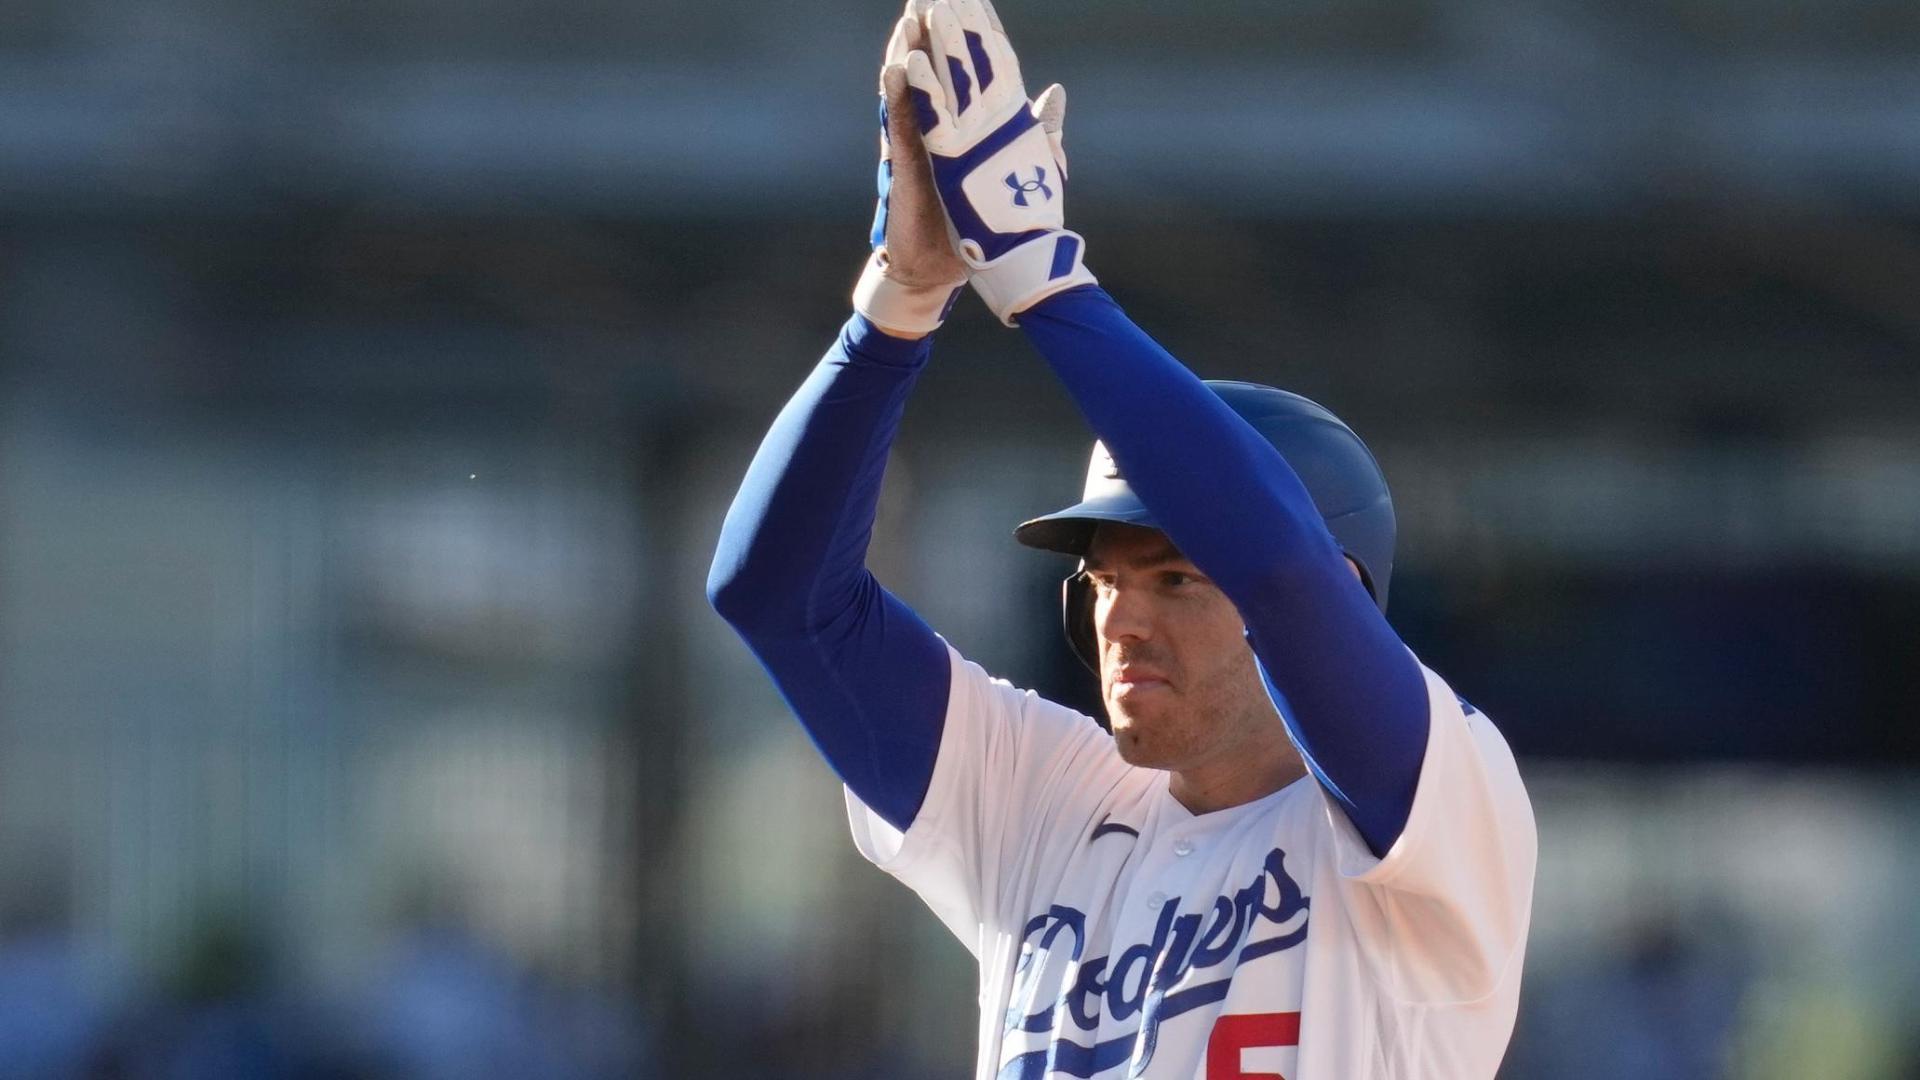 Los Angeles Dodgers star Freddie Freeman collects 2,000th hit